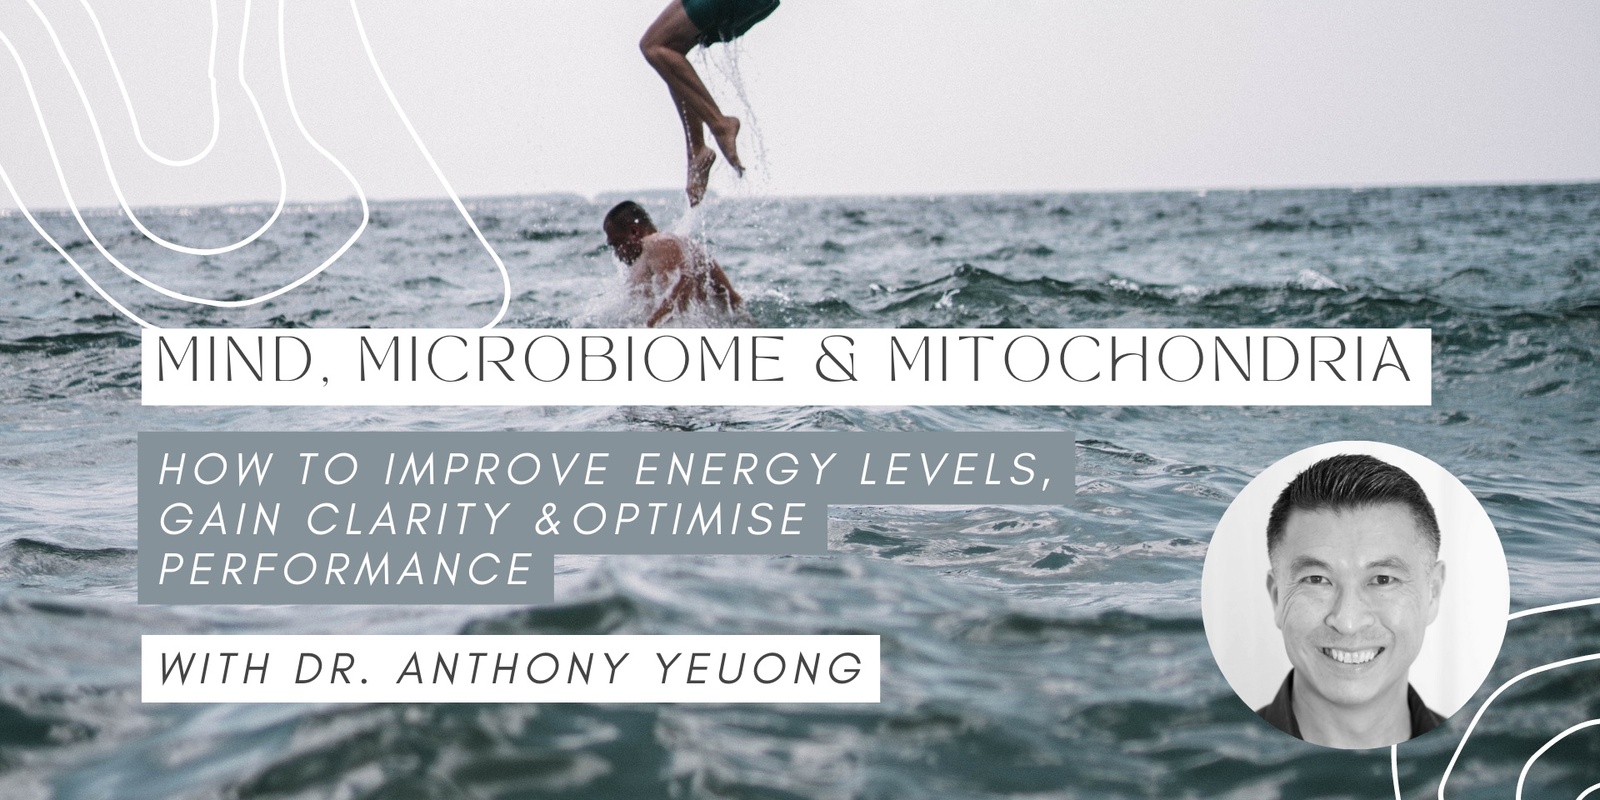 Winter Wellness - MIND, MICROBIOME & MITOCHONDRIA: How to gain clarity, improve energy levels and optimise performance.